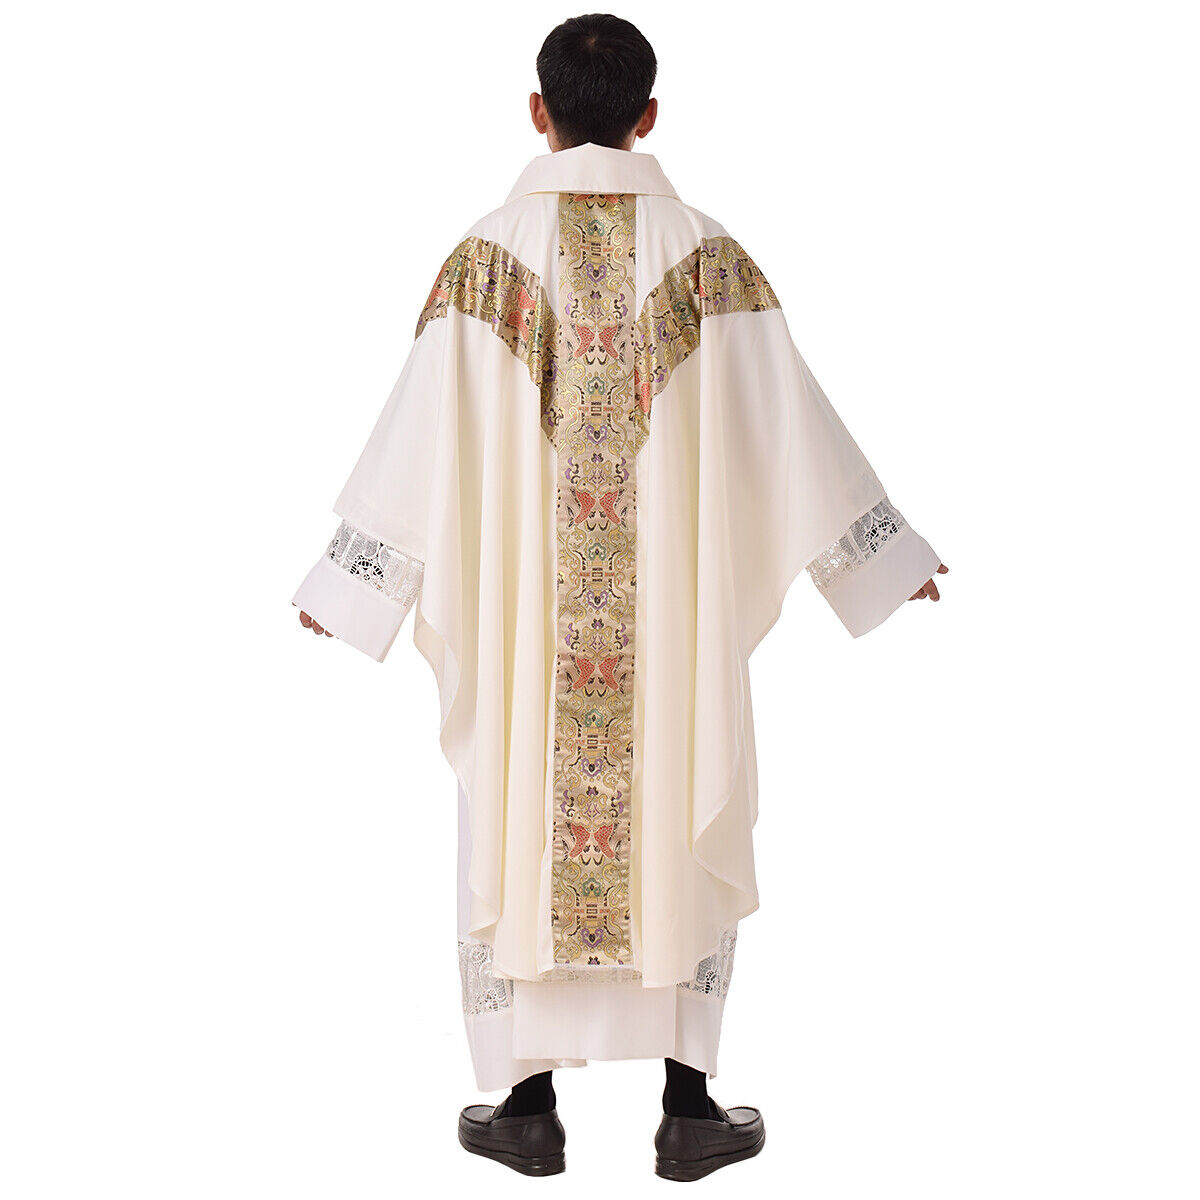 Church Clergy Vestments Catholic Priest Chasuble Cope J032 Robe with stole Blessume - фотография #7